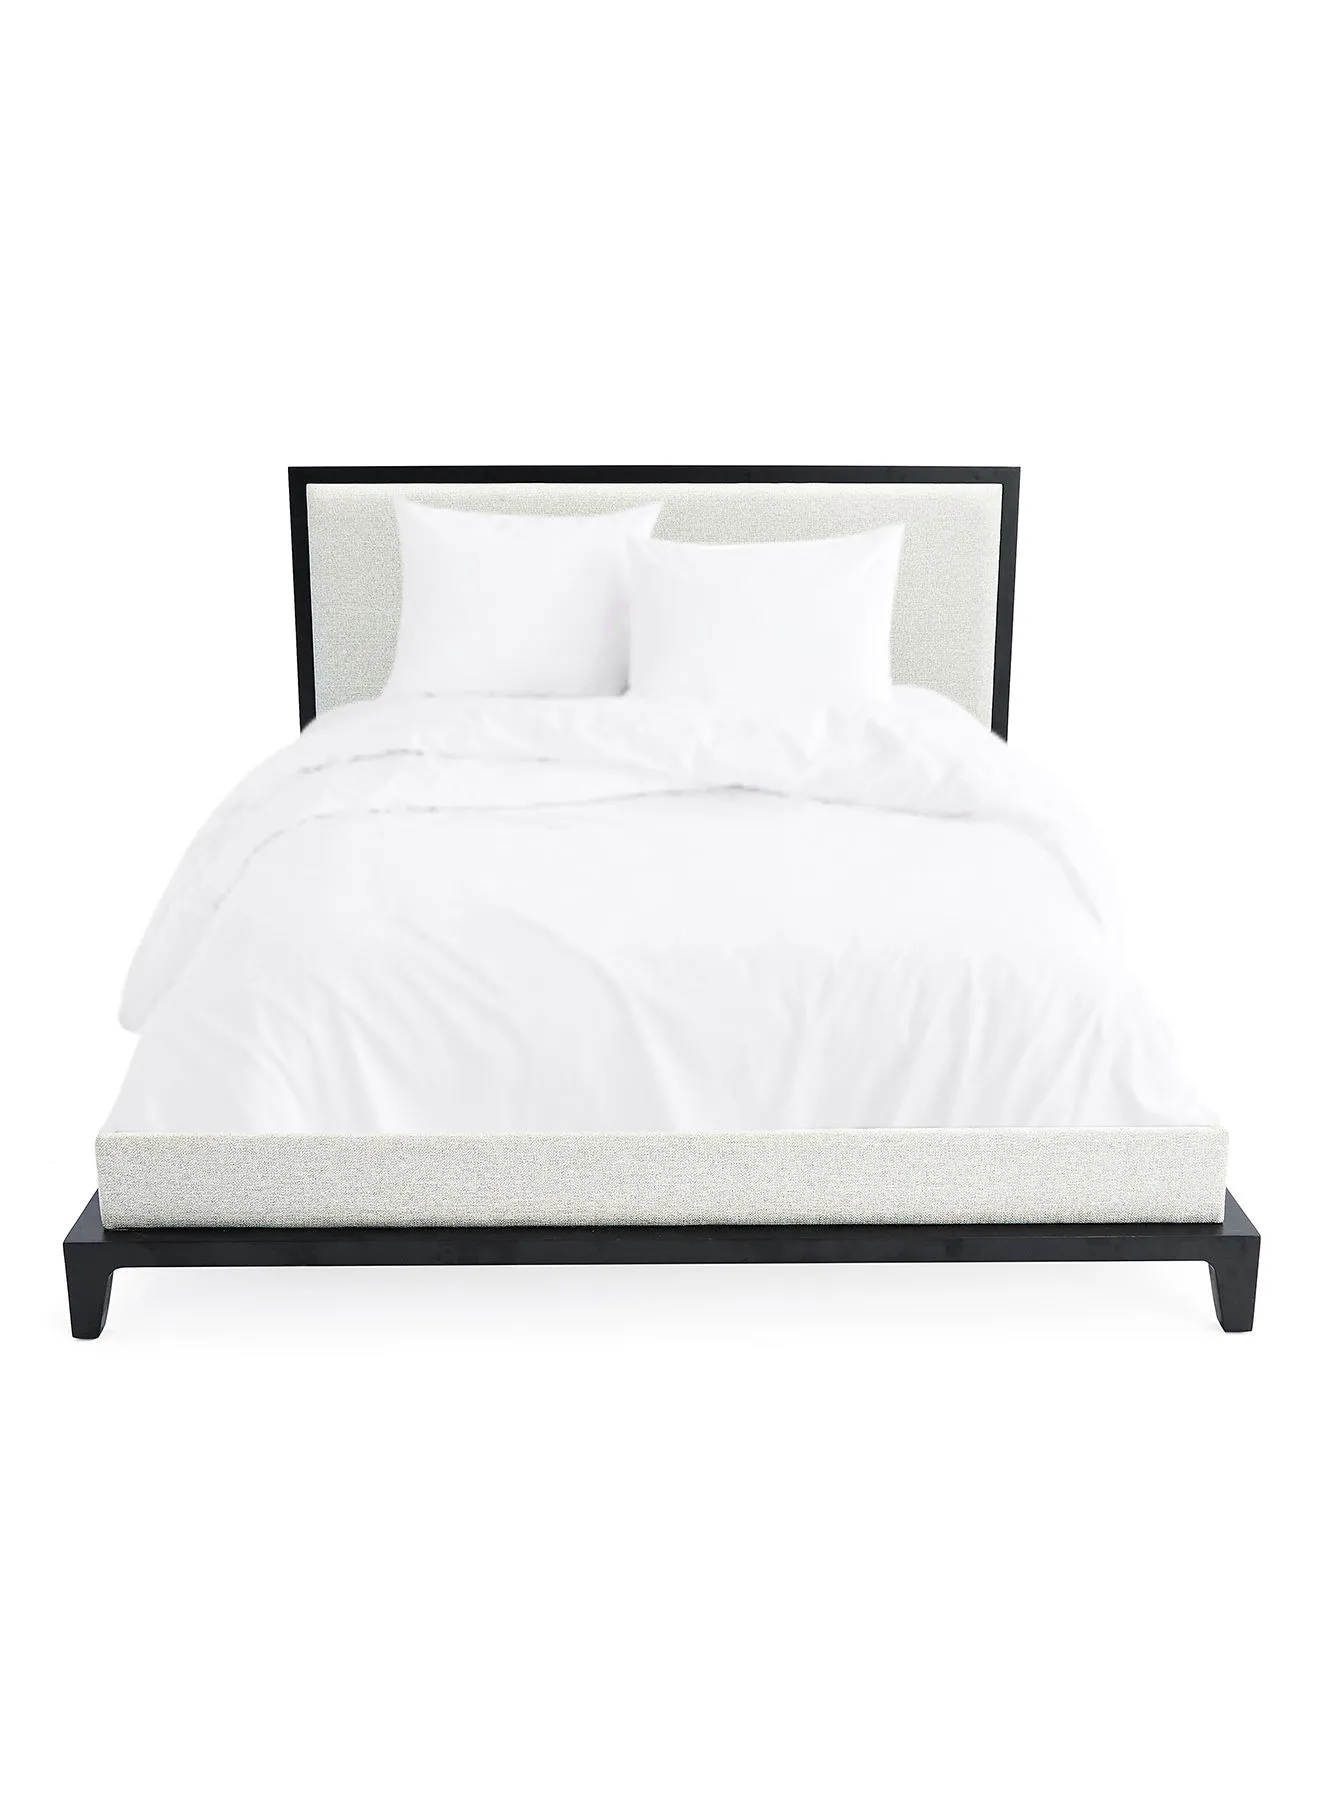 ebb & flow Bed Frame Luxurious - Queen Size Bed - Elegant Stud Collection - Black/Off White Color - Size 1660 X 2080 X 1100 - Luxurious Home